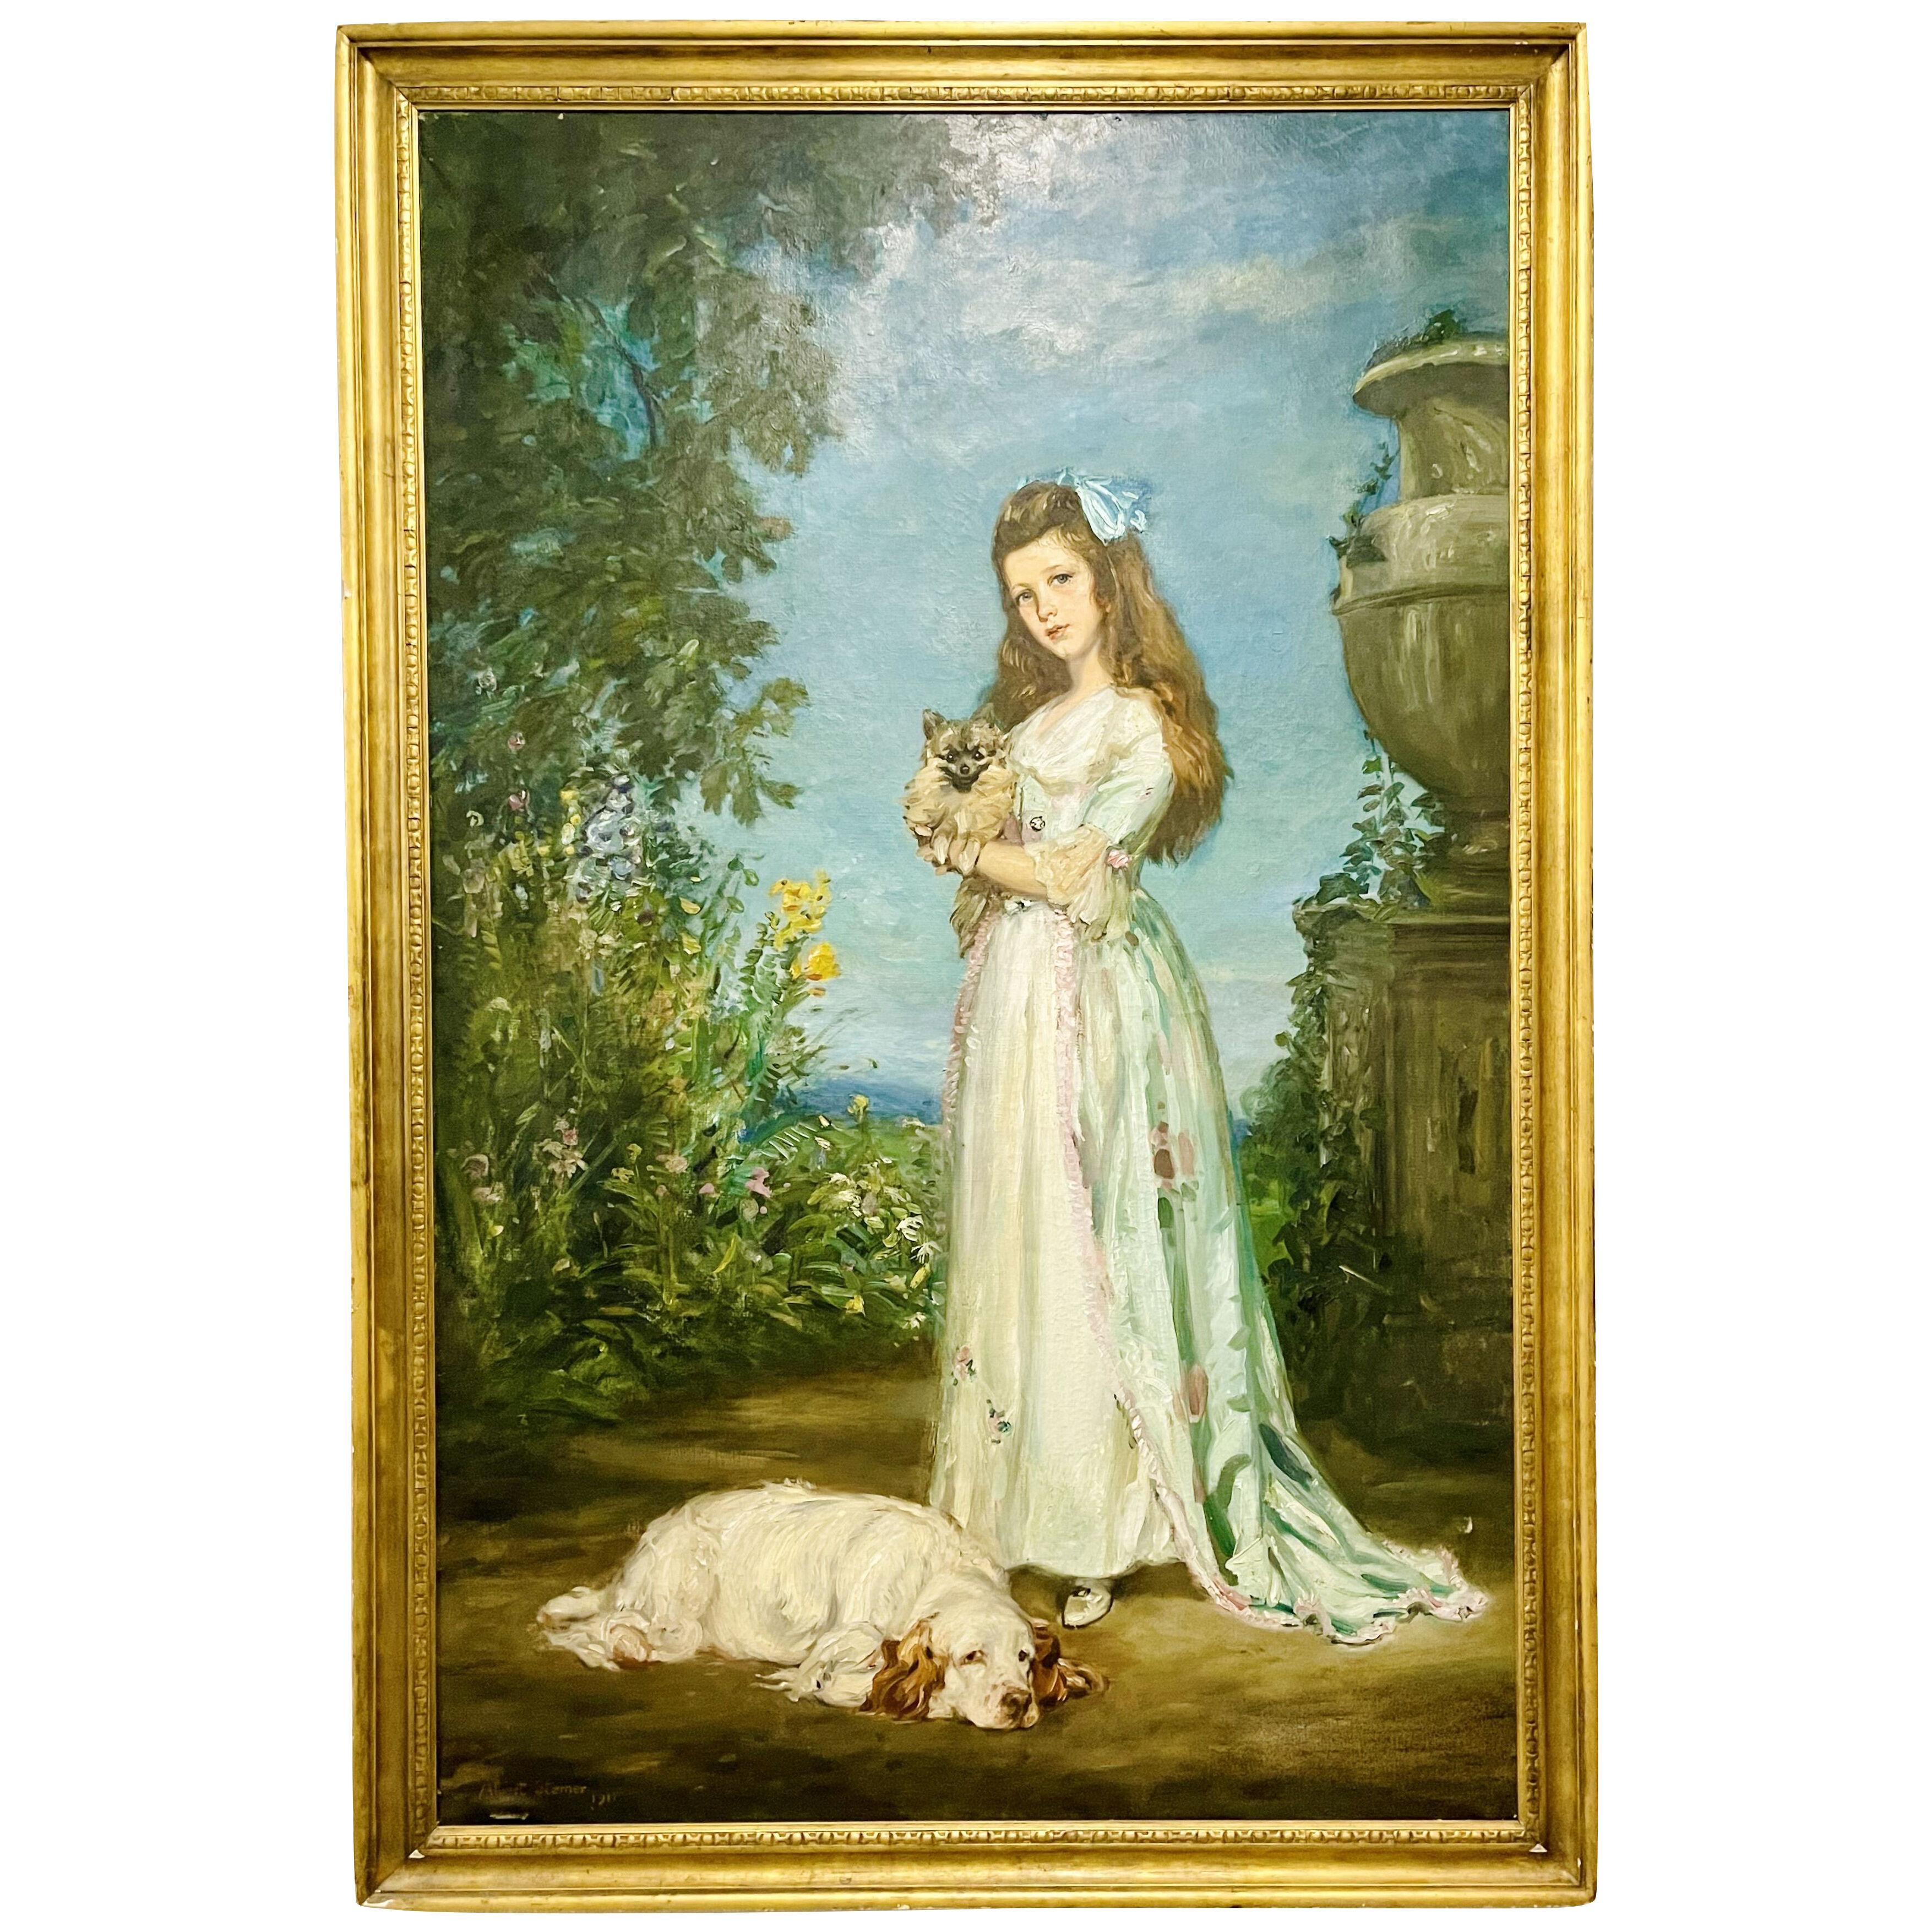 Oil on Canvas, Signed Albert Sterber, Dated 1911, Monumental, Provenance